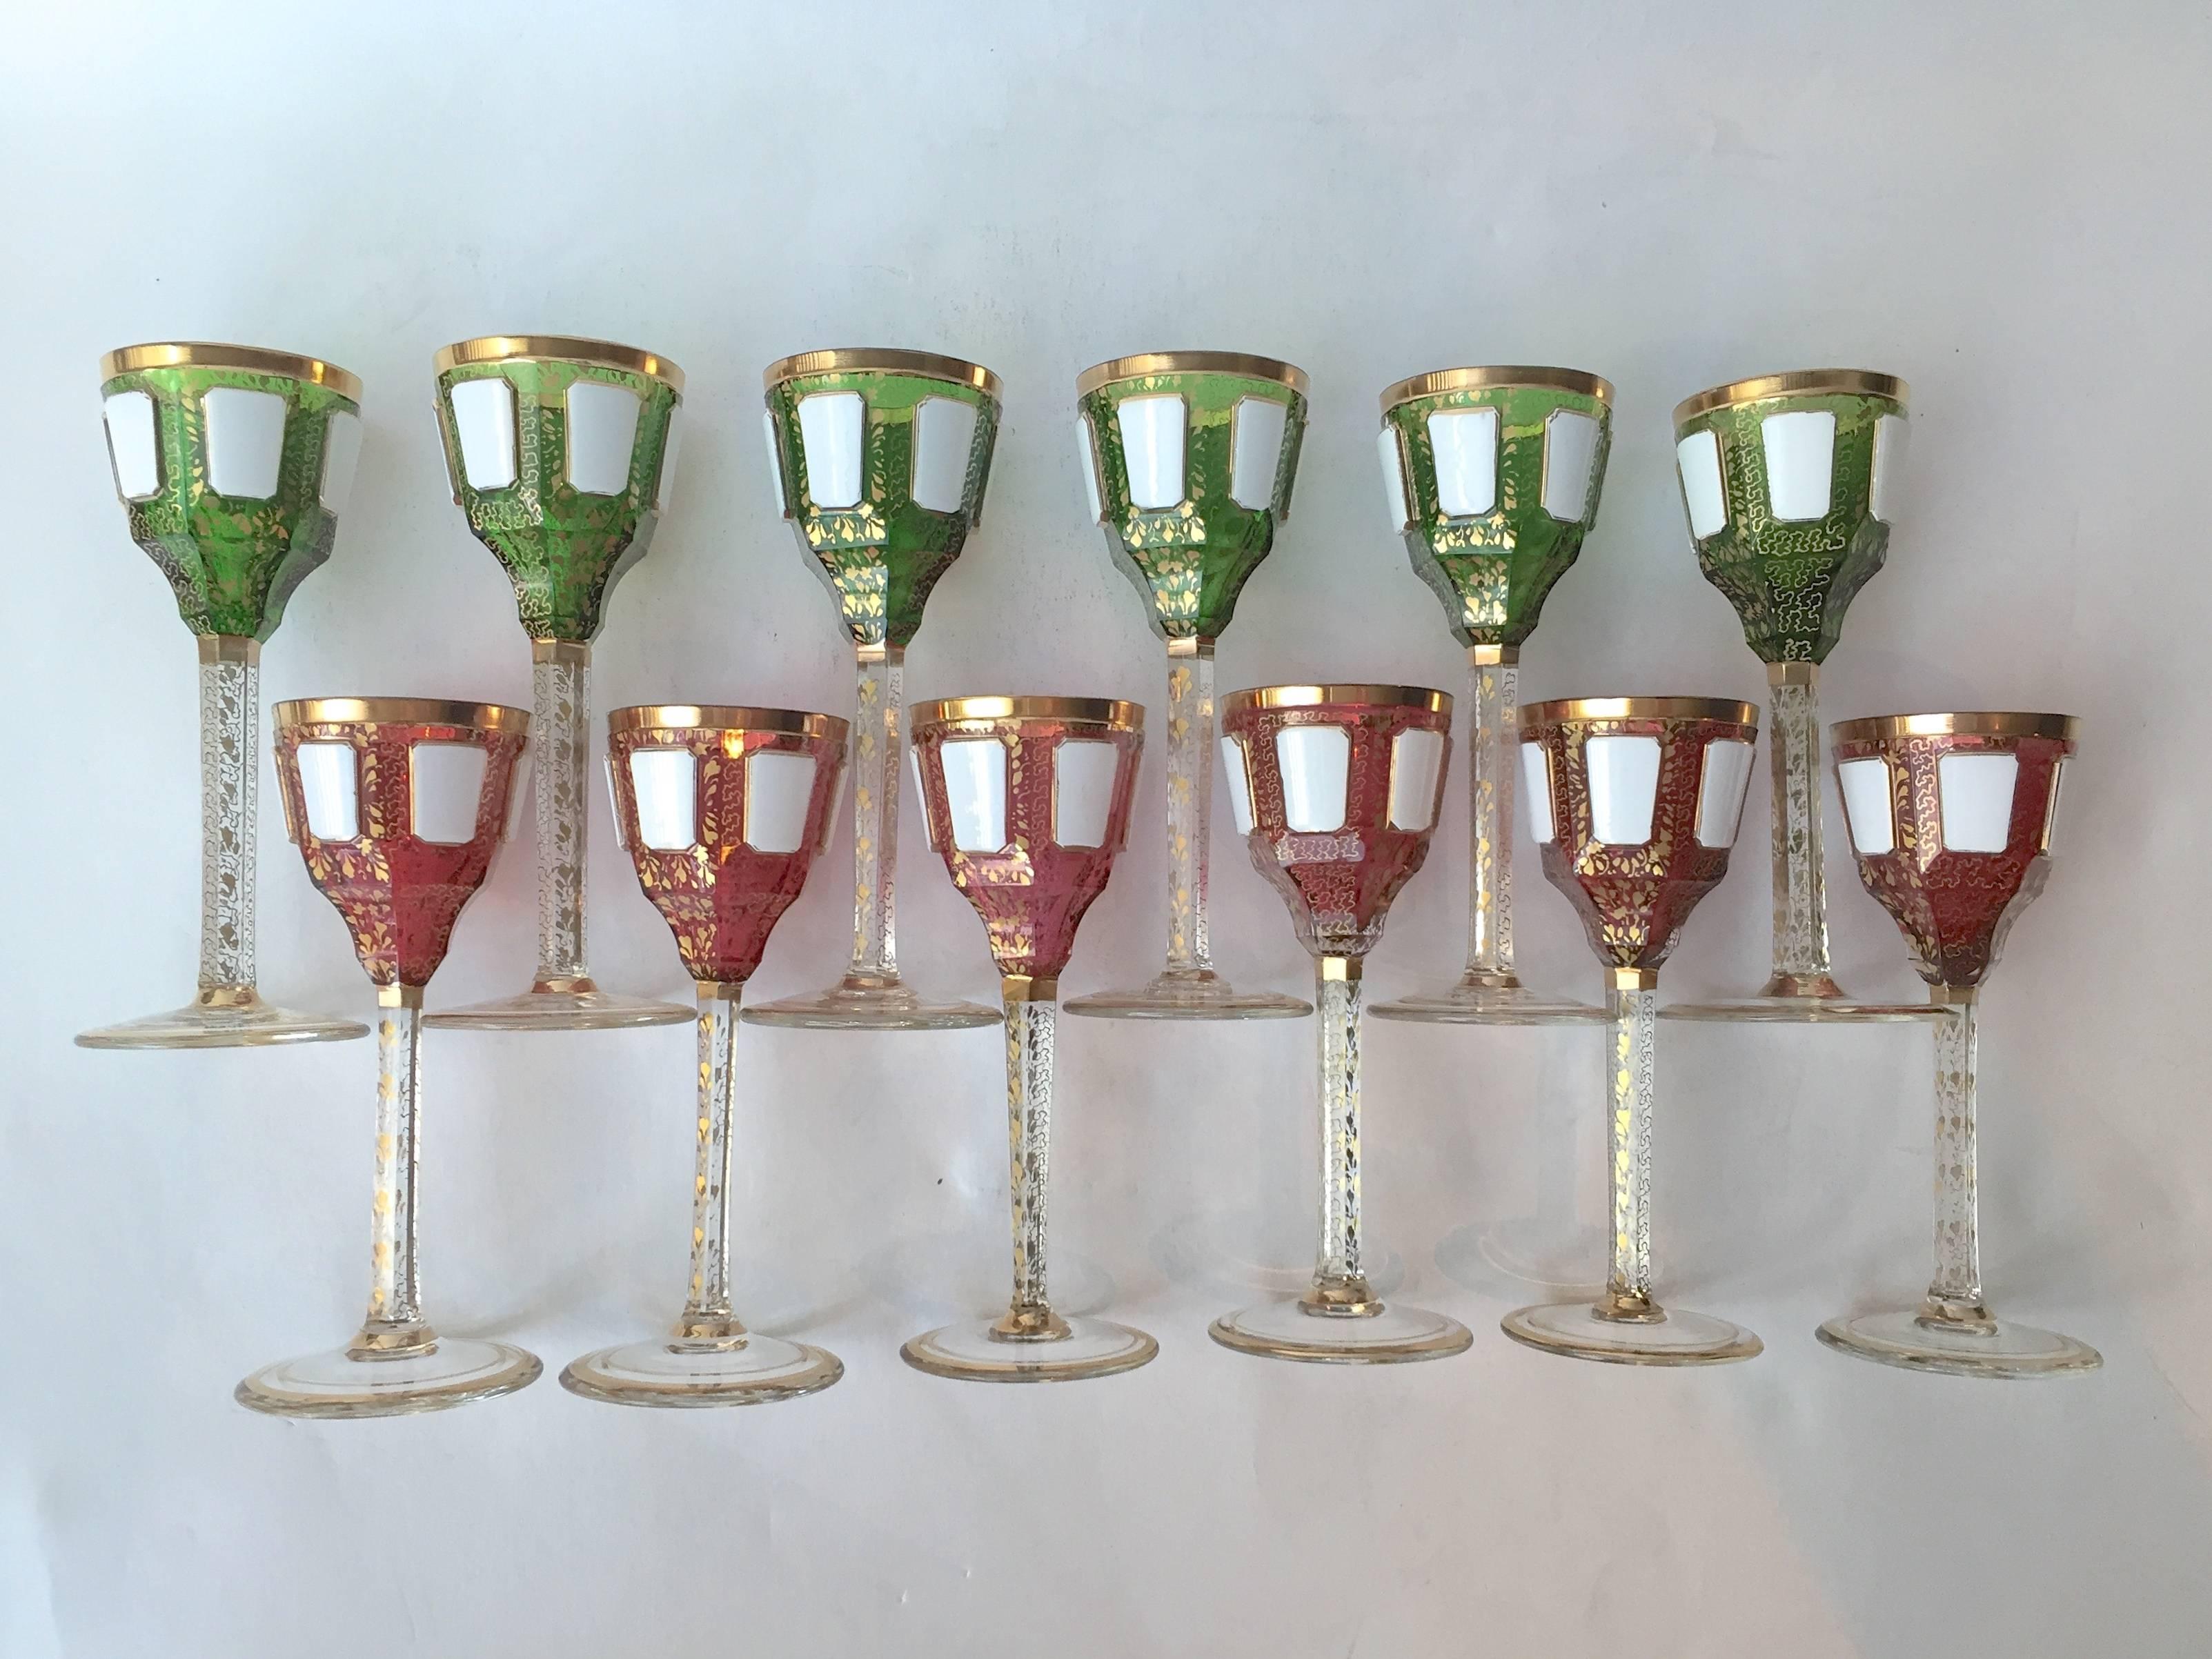 A very rare set of 12 Moser cordials two colors with enamel panels and
gilding, perfect condition.